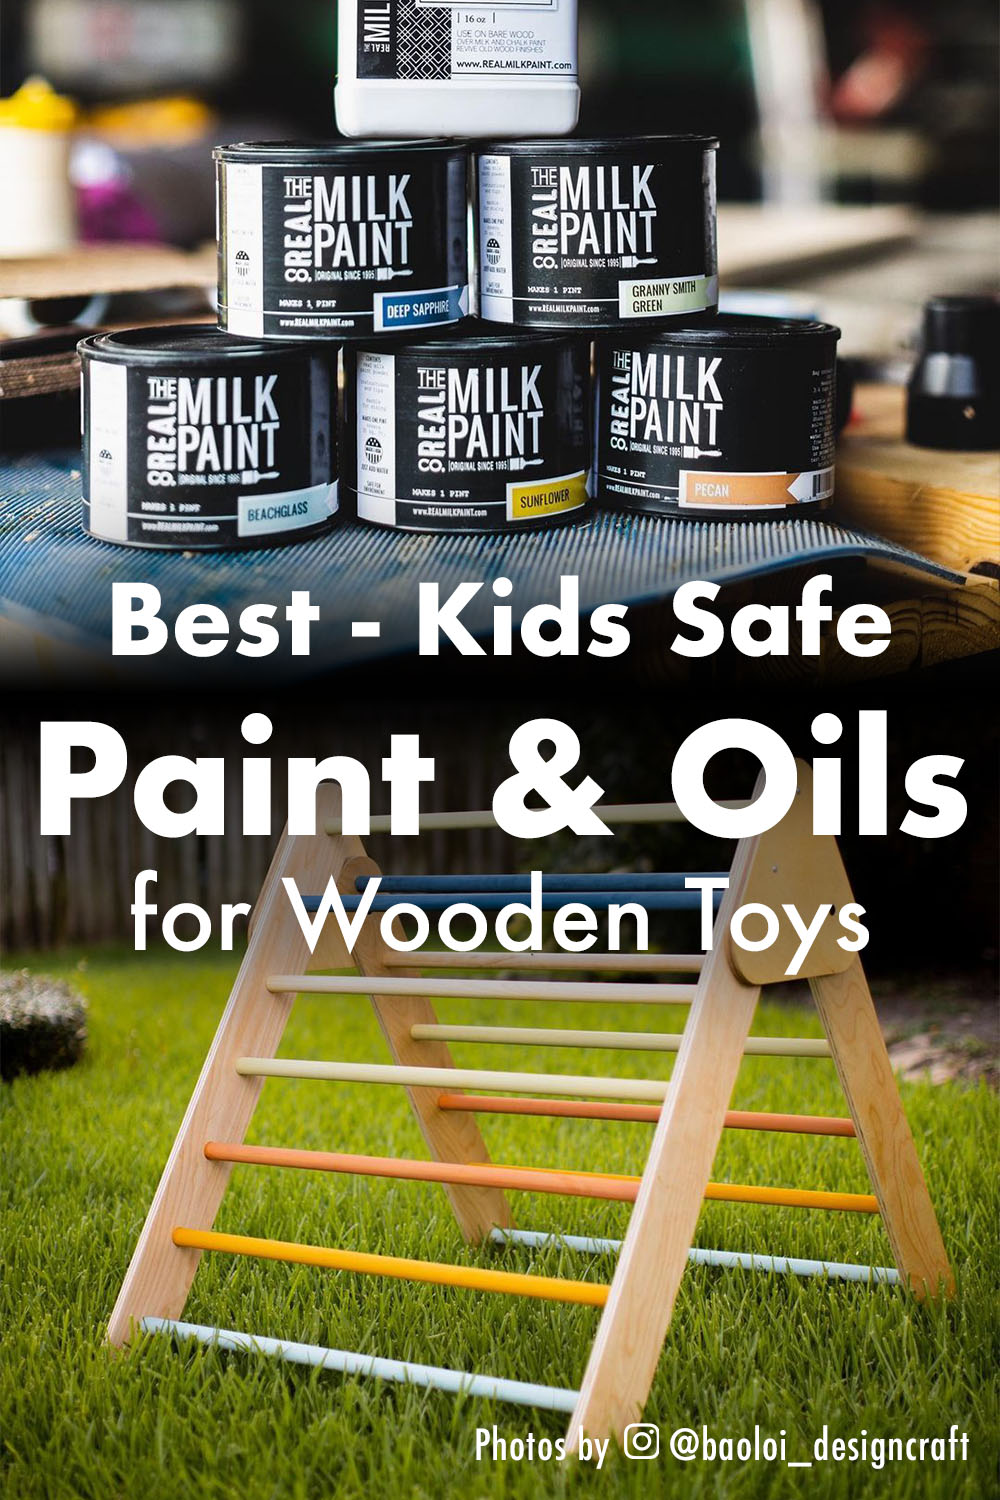 The Benefits of Environmentally Friendly Wood Paint